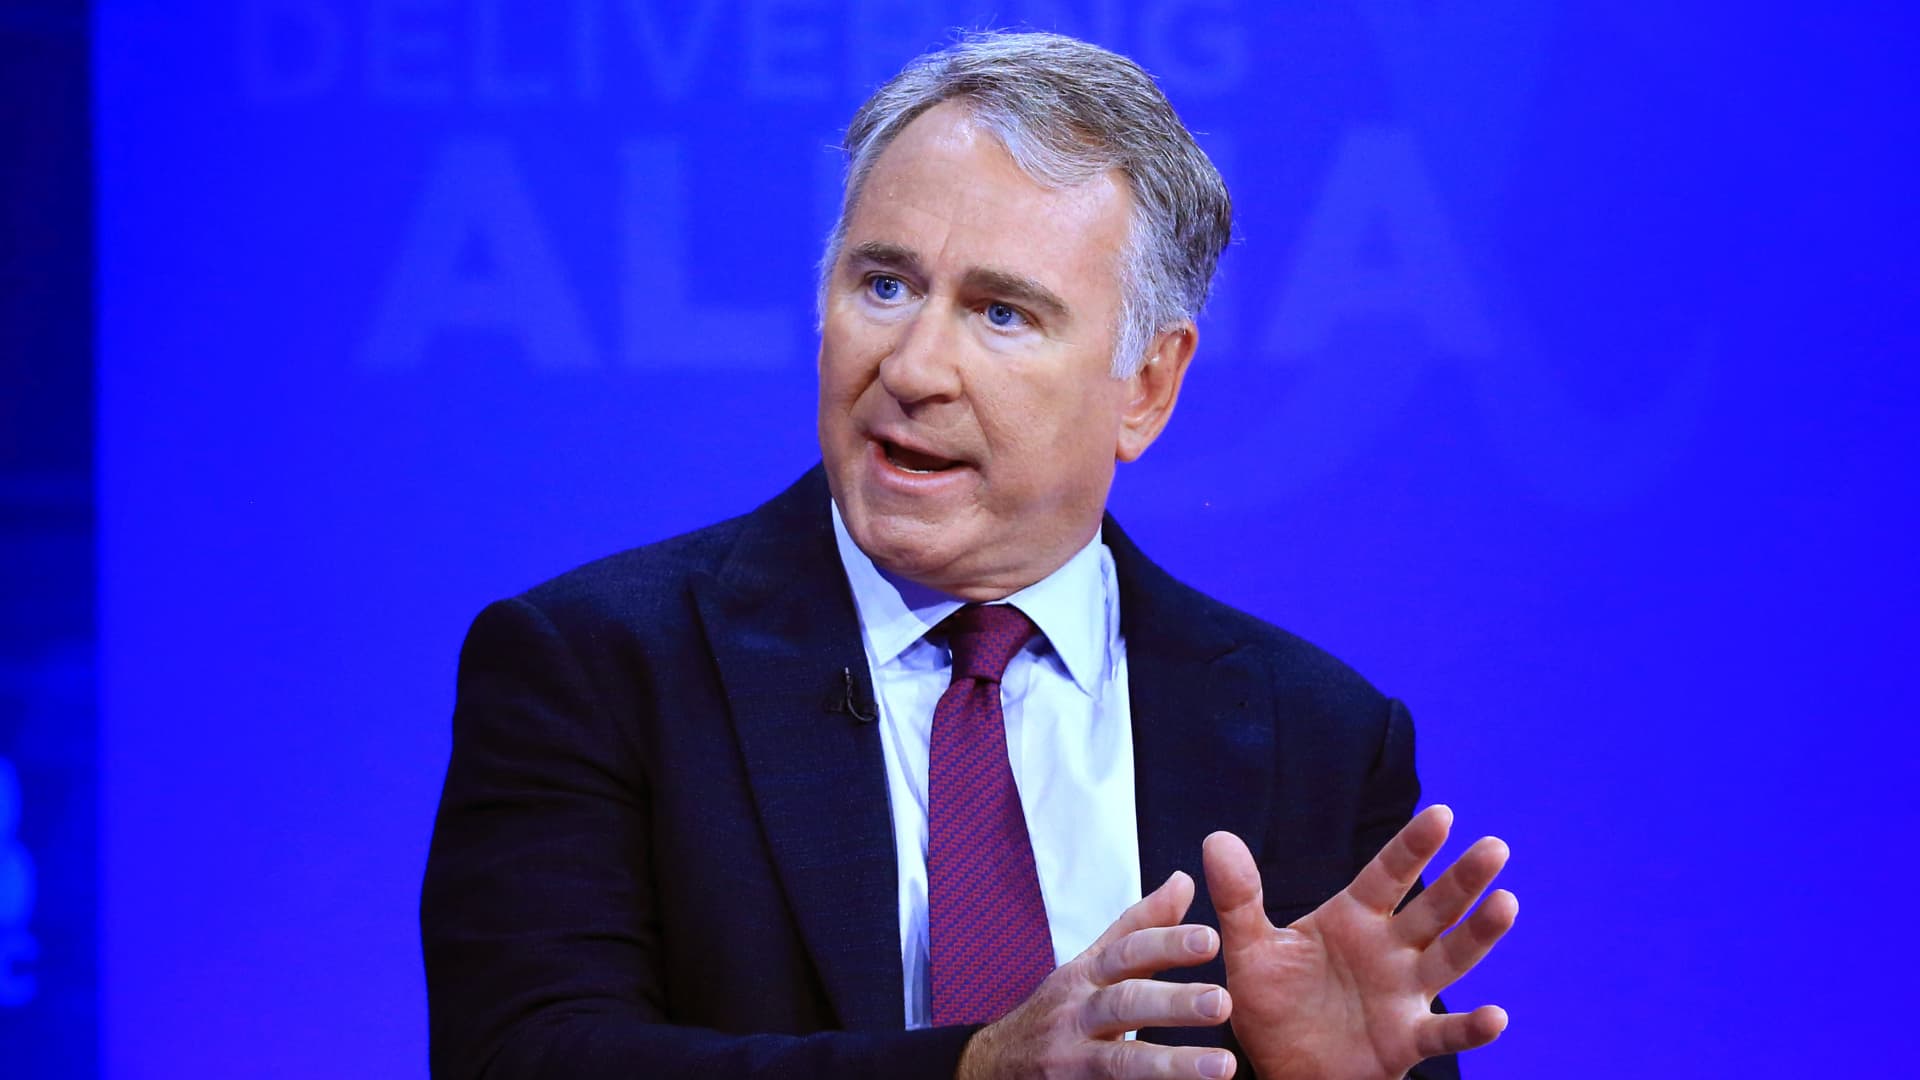 Citadel’s Ken Griffin says the A.I. community is making a mistake by creating so much hype